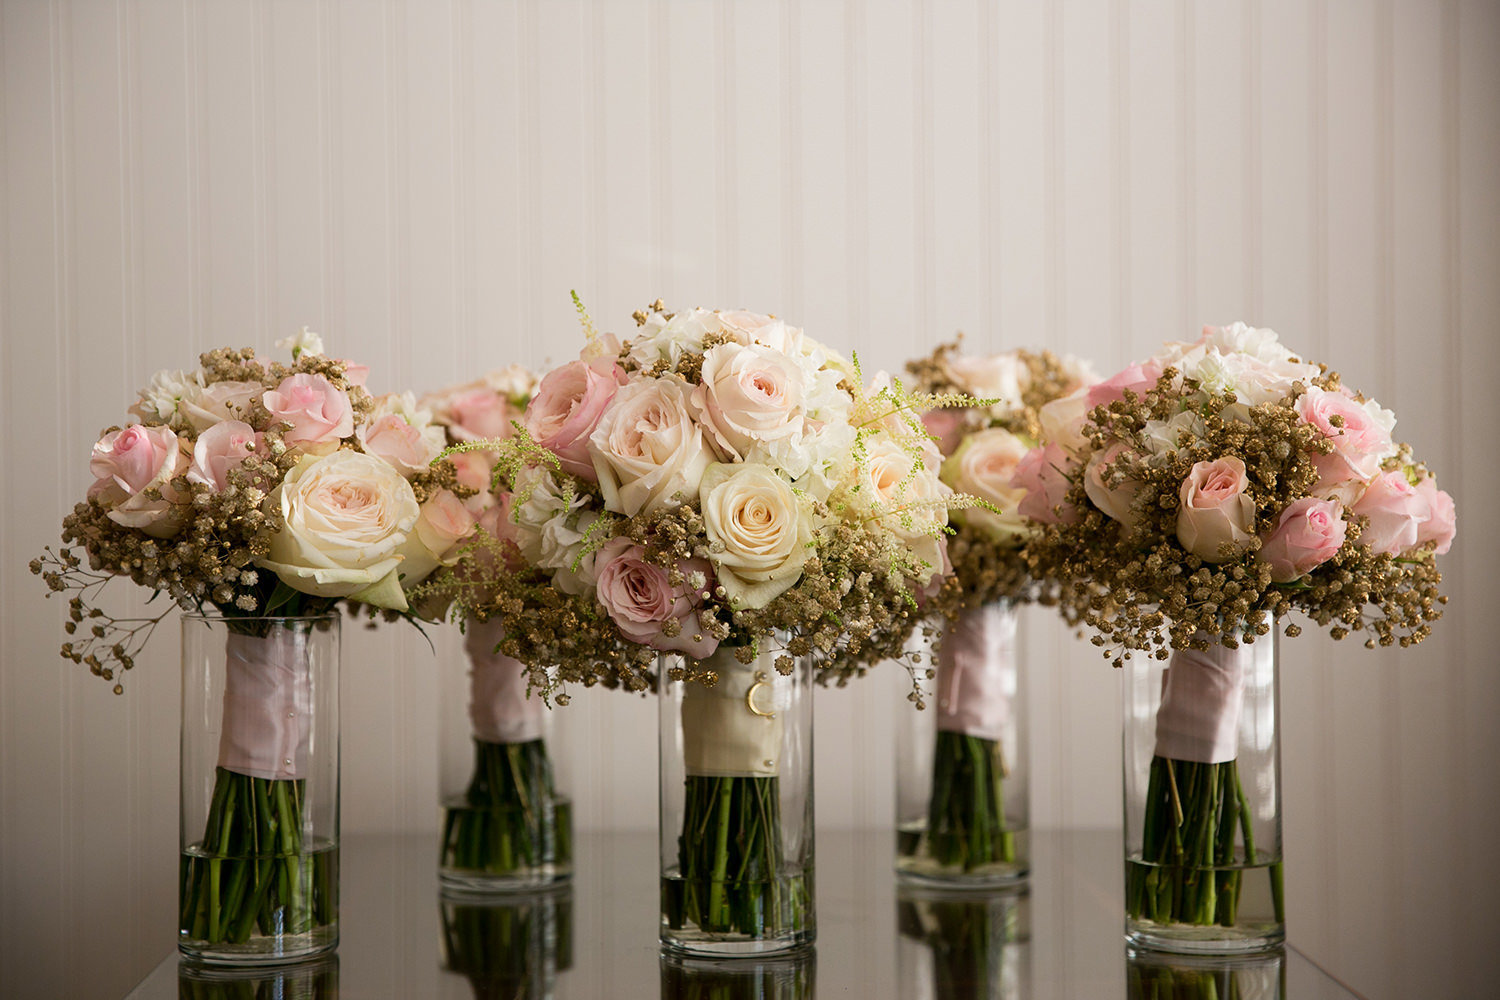 Bouquet detail photo with pink roses